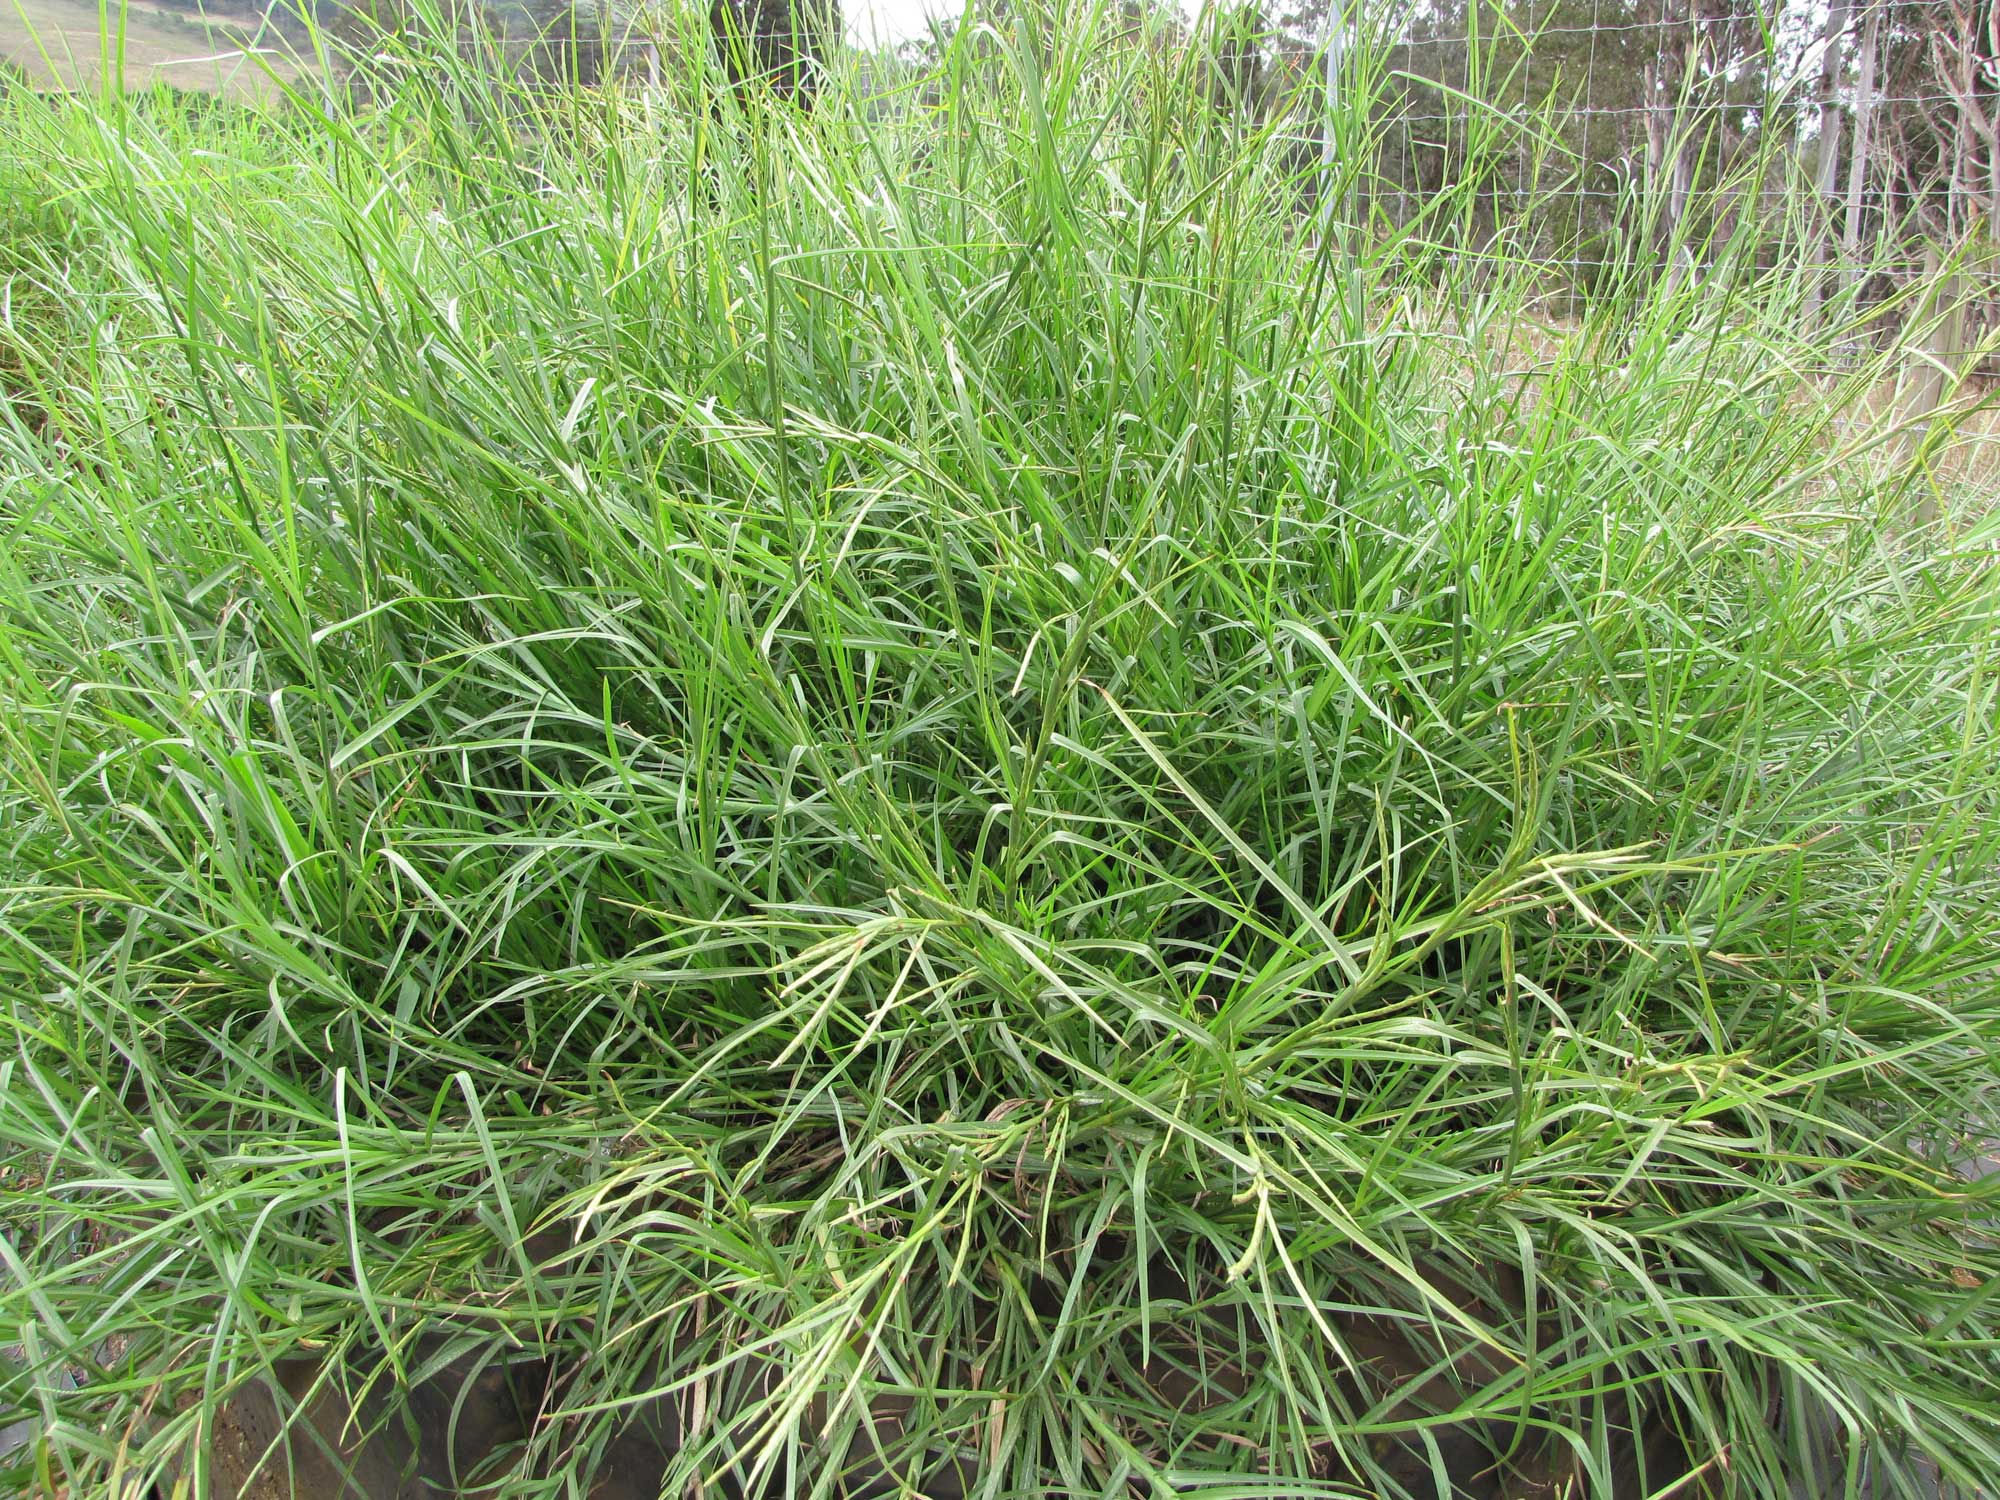 Photograph of limp grass. The photo shows a large clump of long, green grass. Some of the grass stems have inflorescences. 